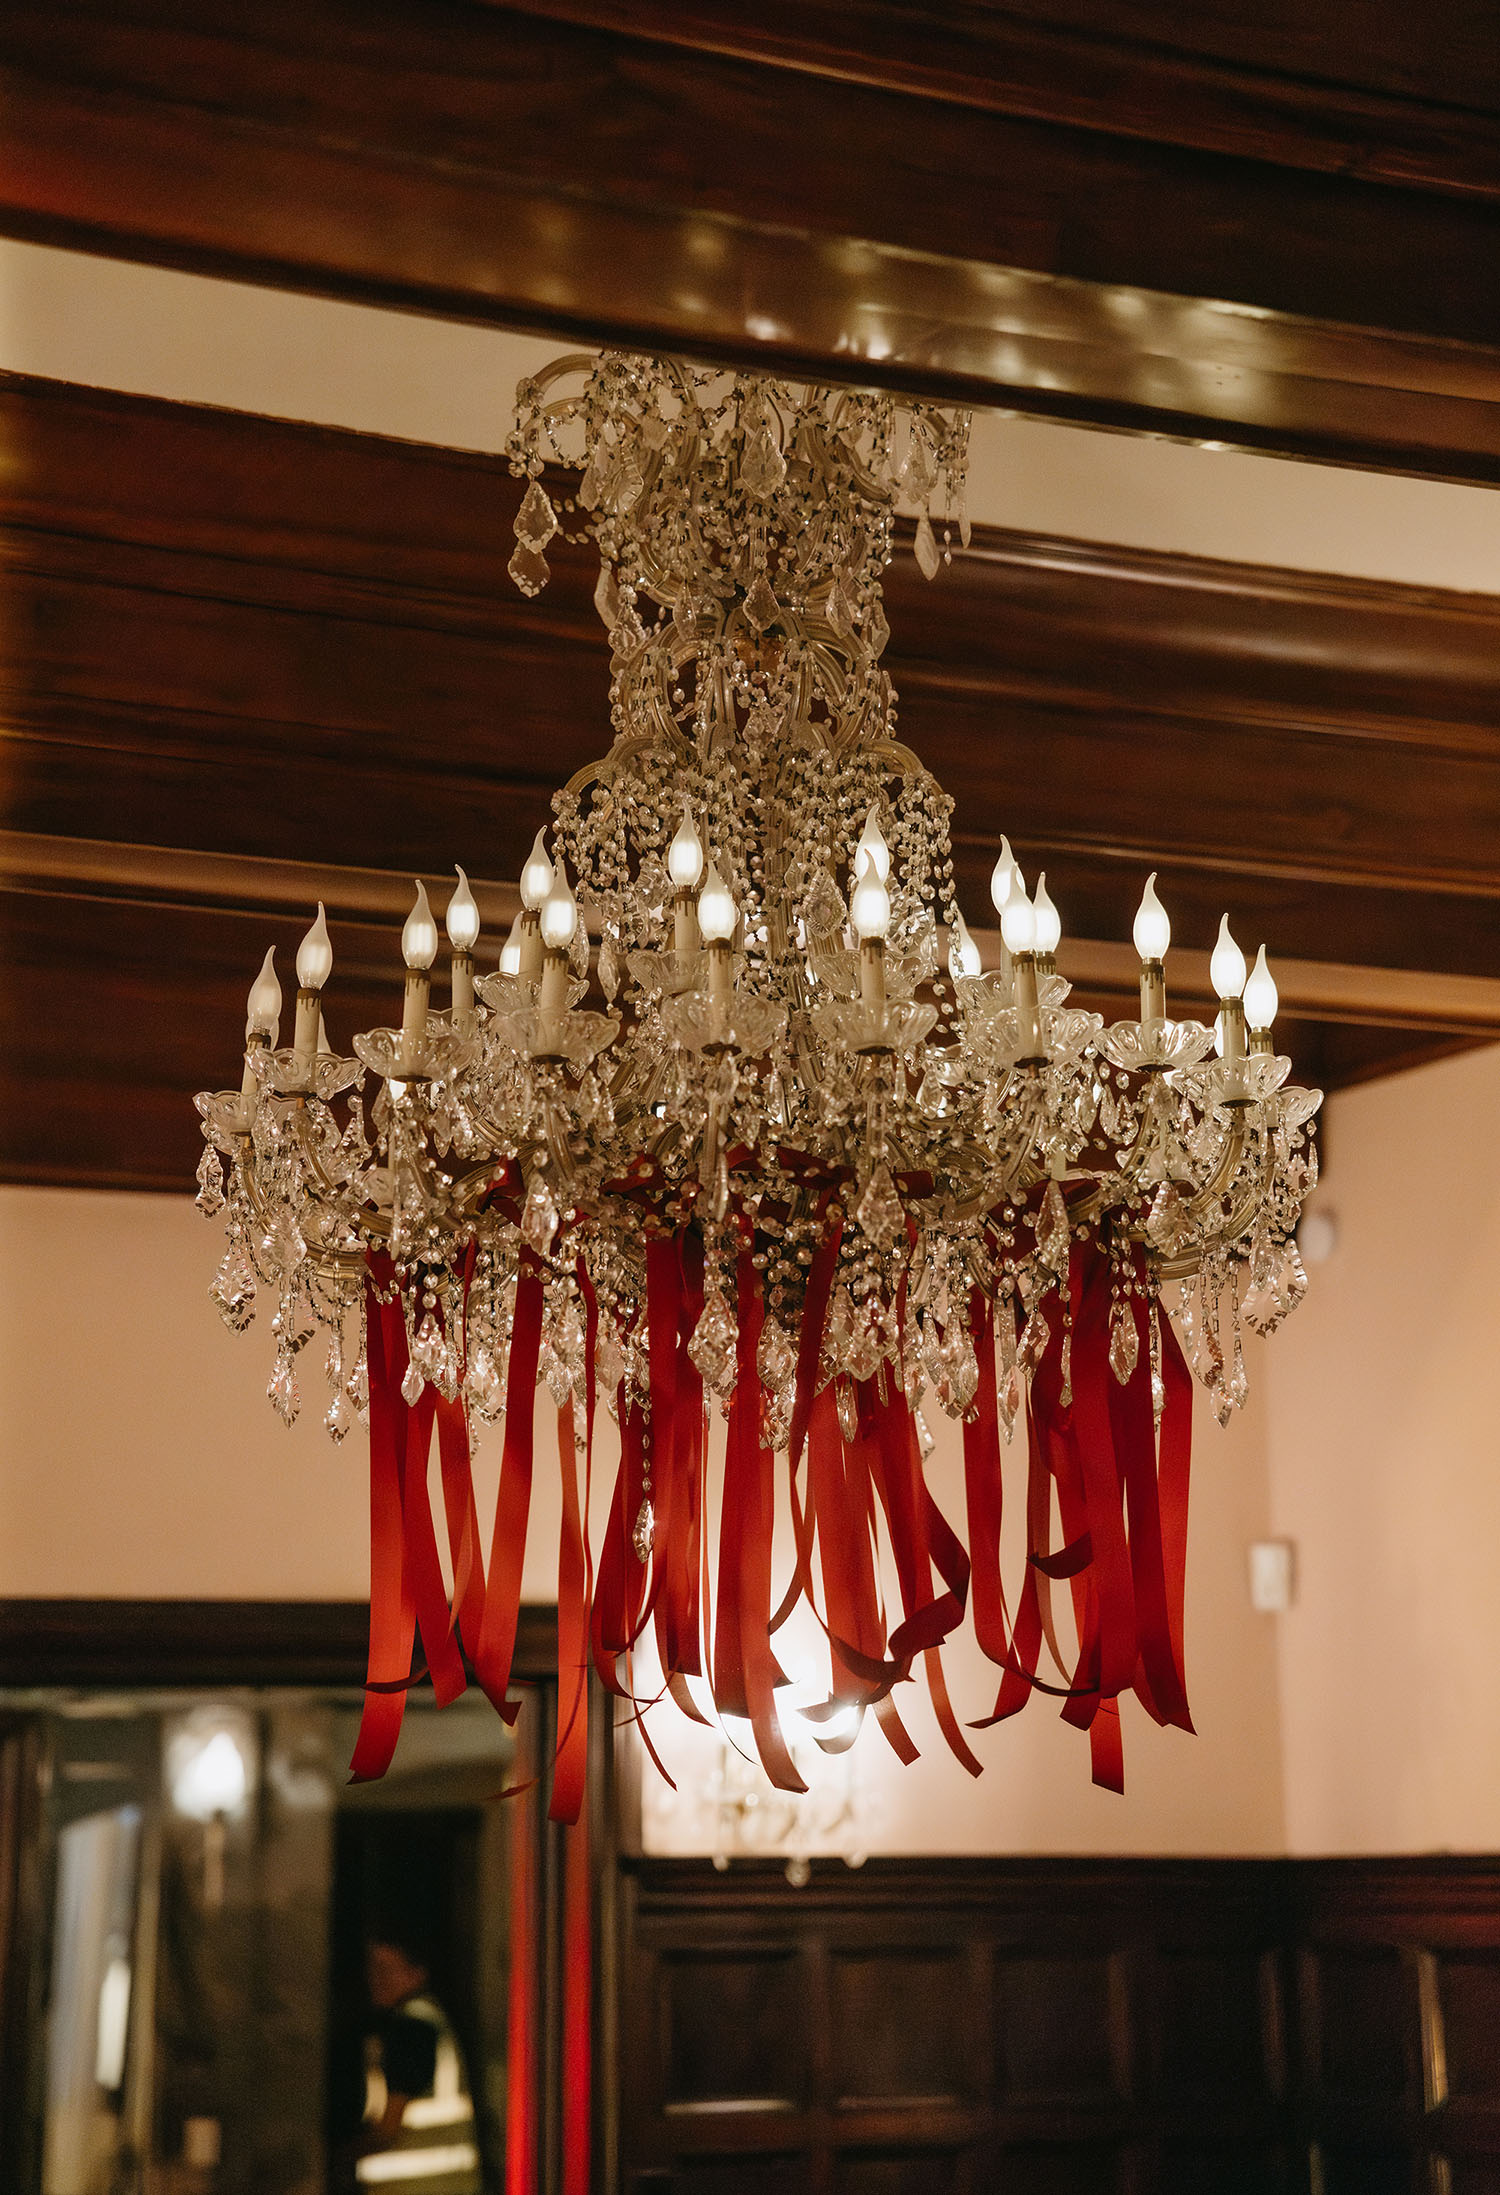 bows on chandelier